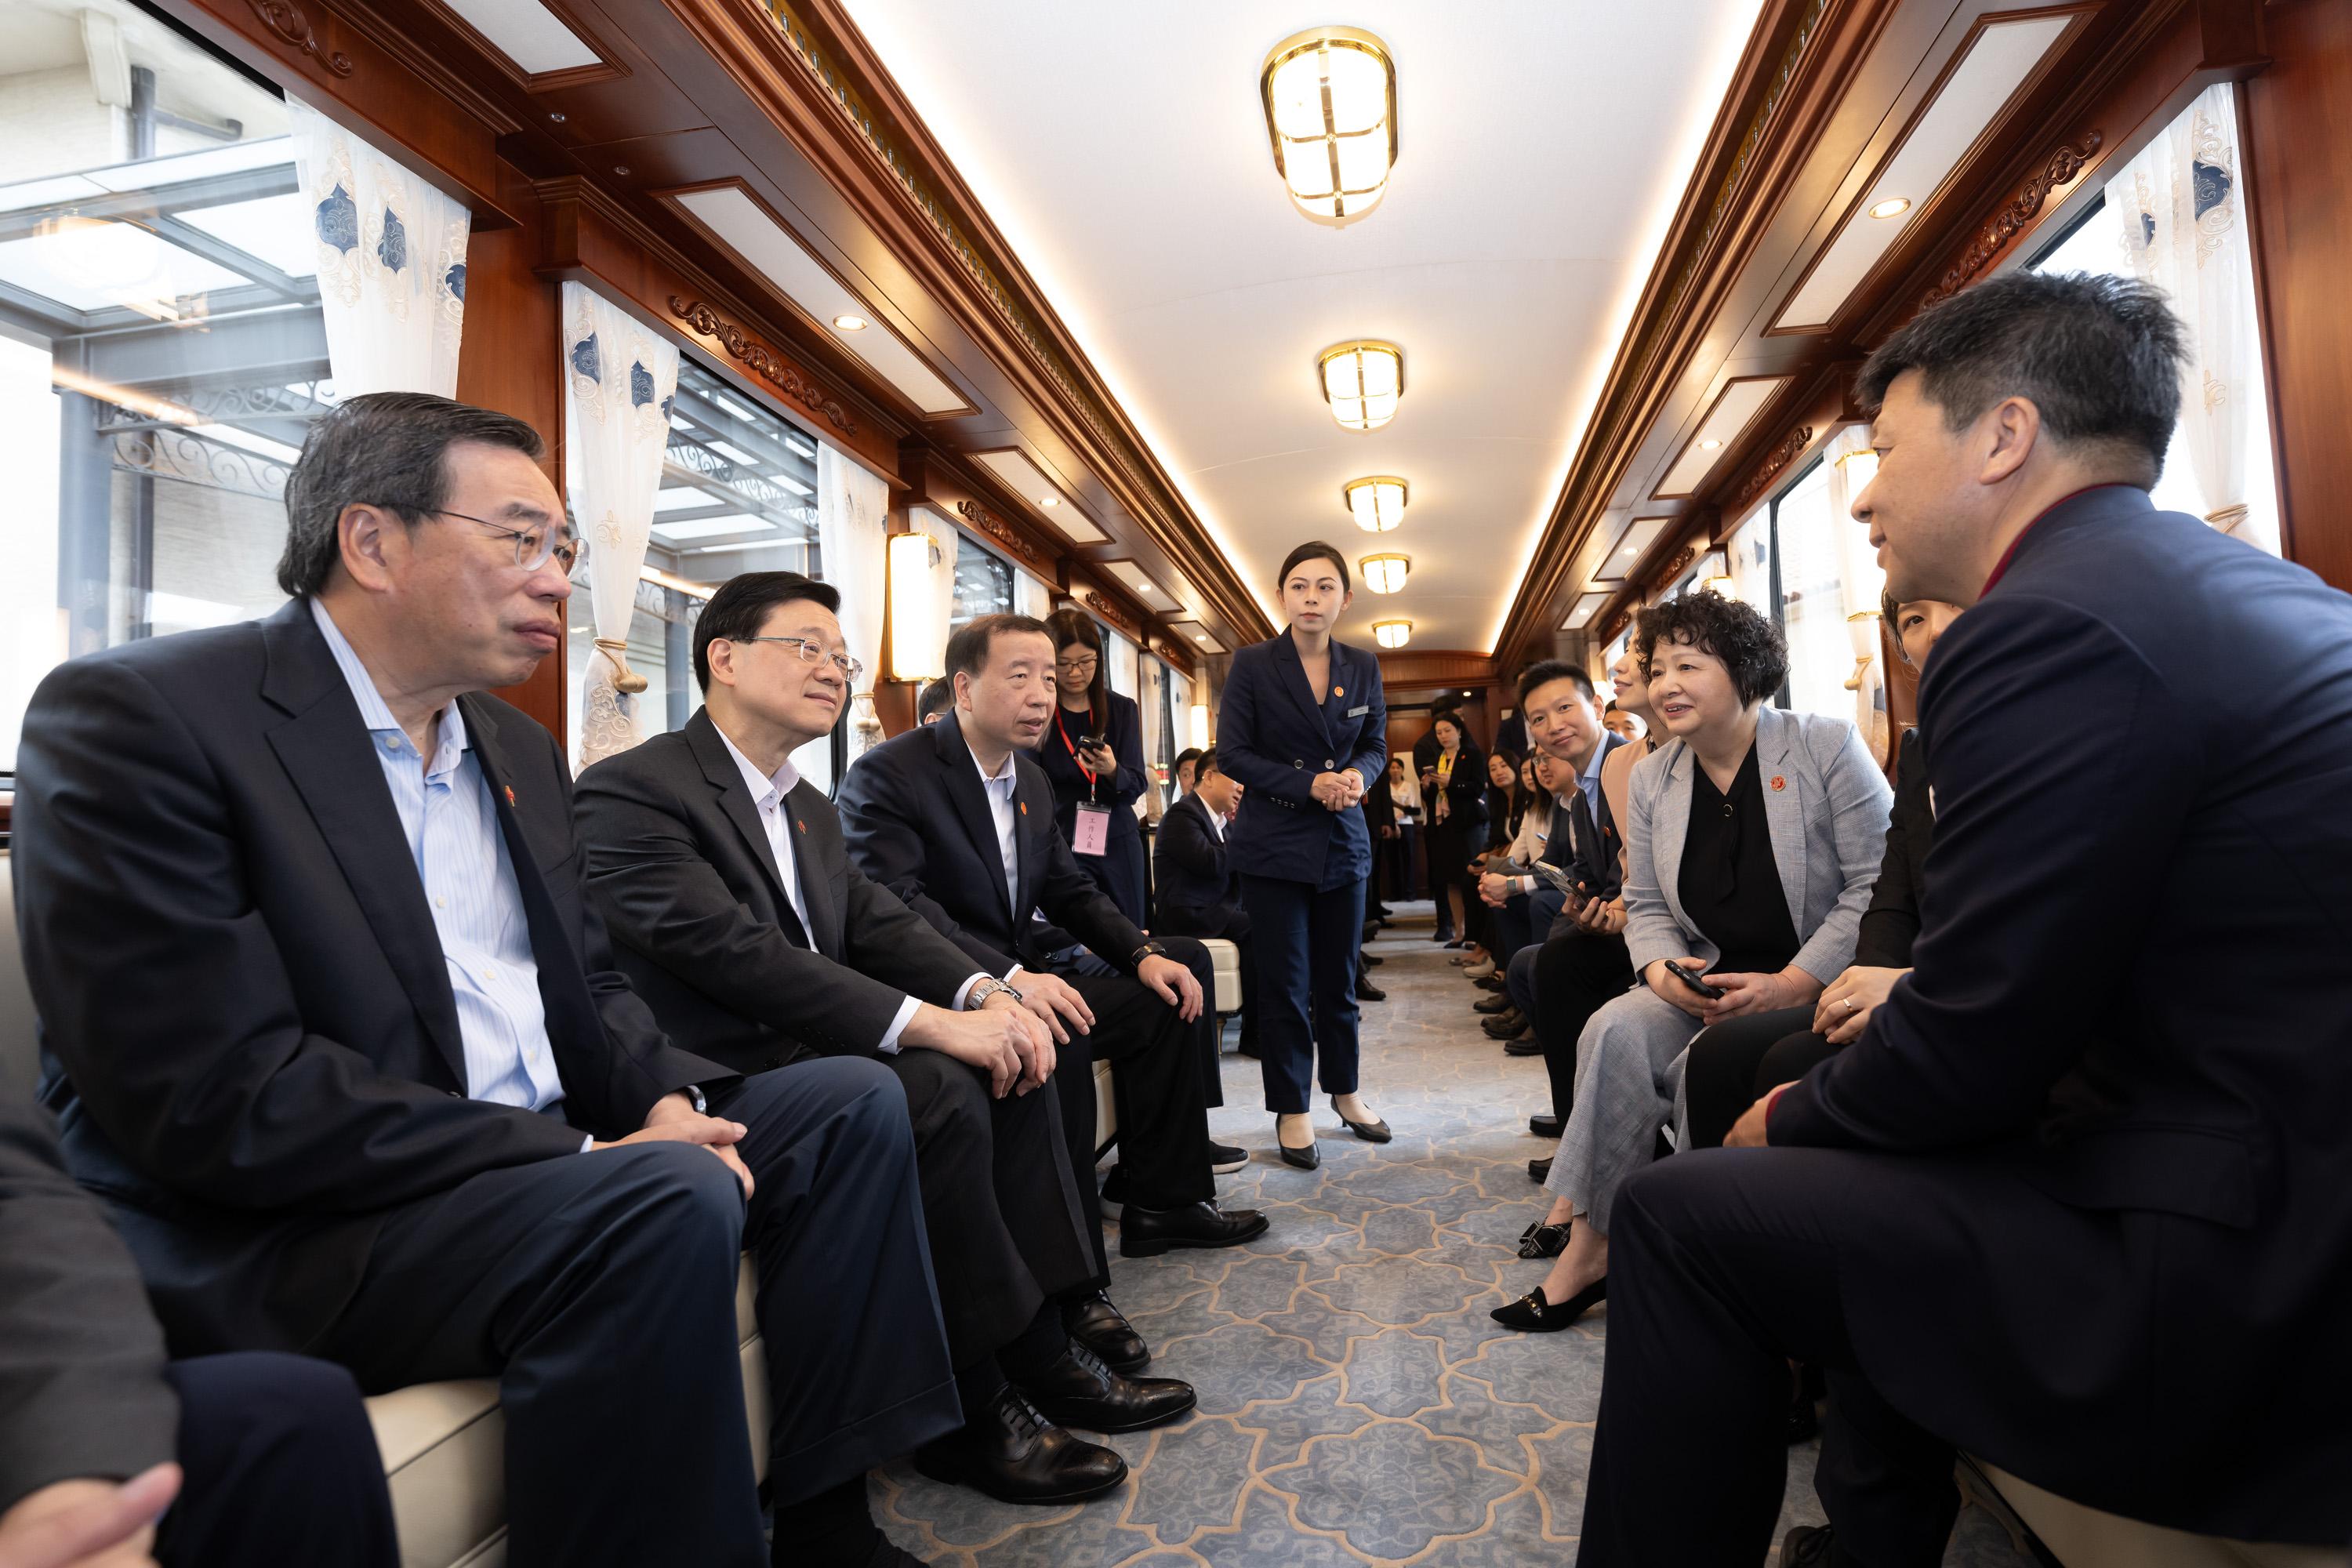 The delegation of the Hong Kong Special Administrative Region Government and the Legislative Council (LegCo) led by the Chief Executive, Mr John Lee, continues its duty visit in the Guangdong-Hong Kong-Macao Greater Bay Area today (April 23). Photo shows the Chief Executive, Mr John Lee (second left); the President of LegCo, Mr Andrew Leung (first left); the Secretary of the Dongguan Municipal Committee of the Communist Party of China, Mr Xiao Yafei (third left); and other delegation members taking a tram to tour the Huawei Ox Horn Campus.